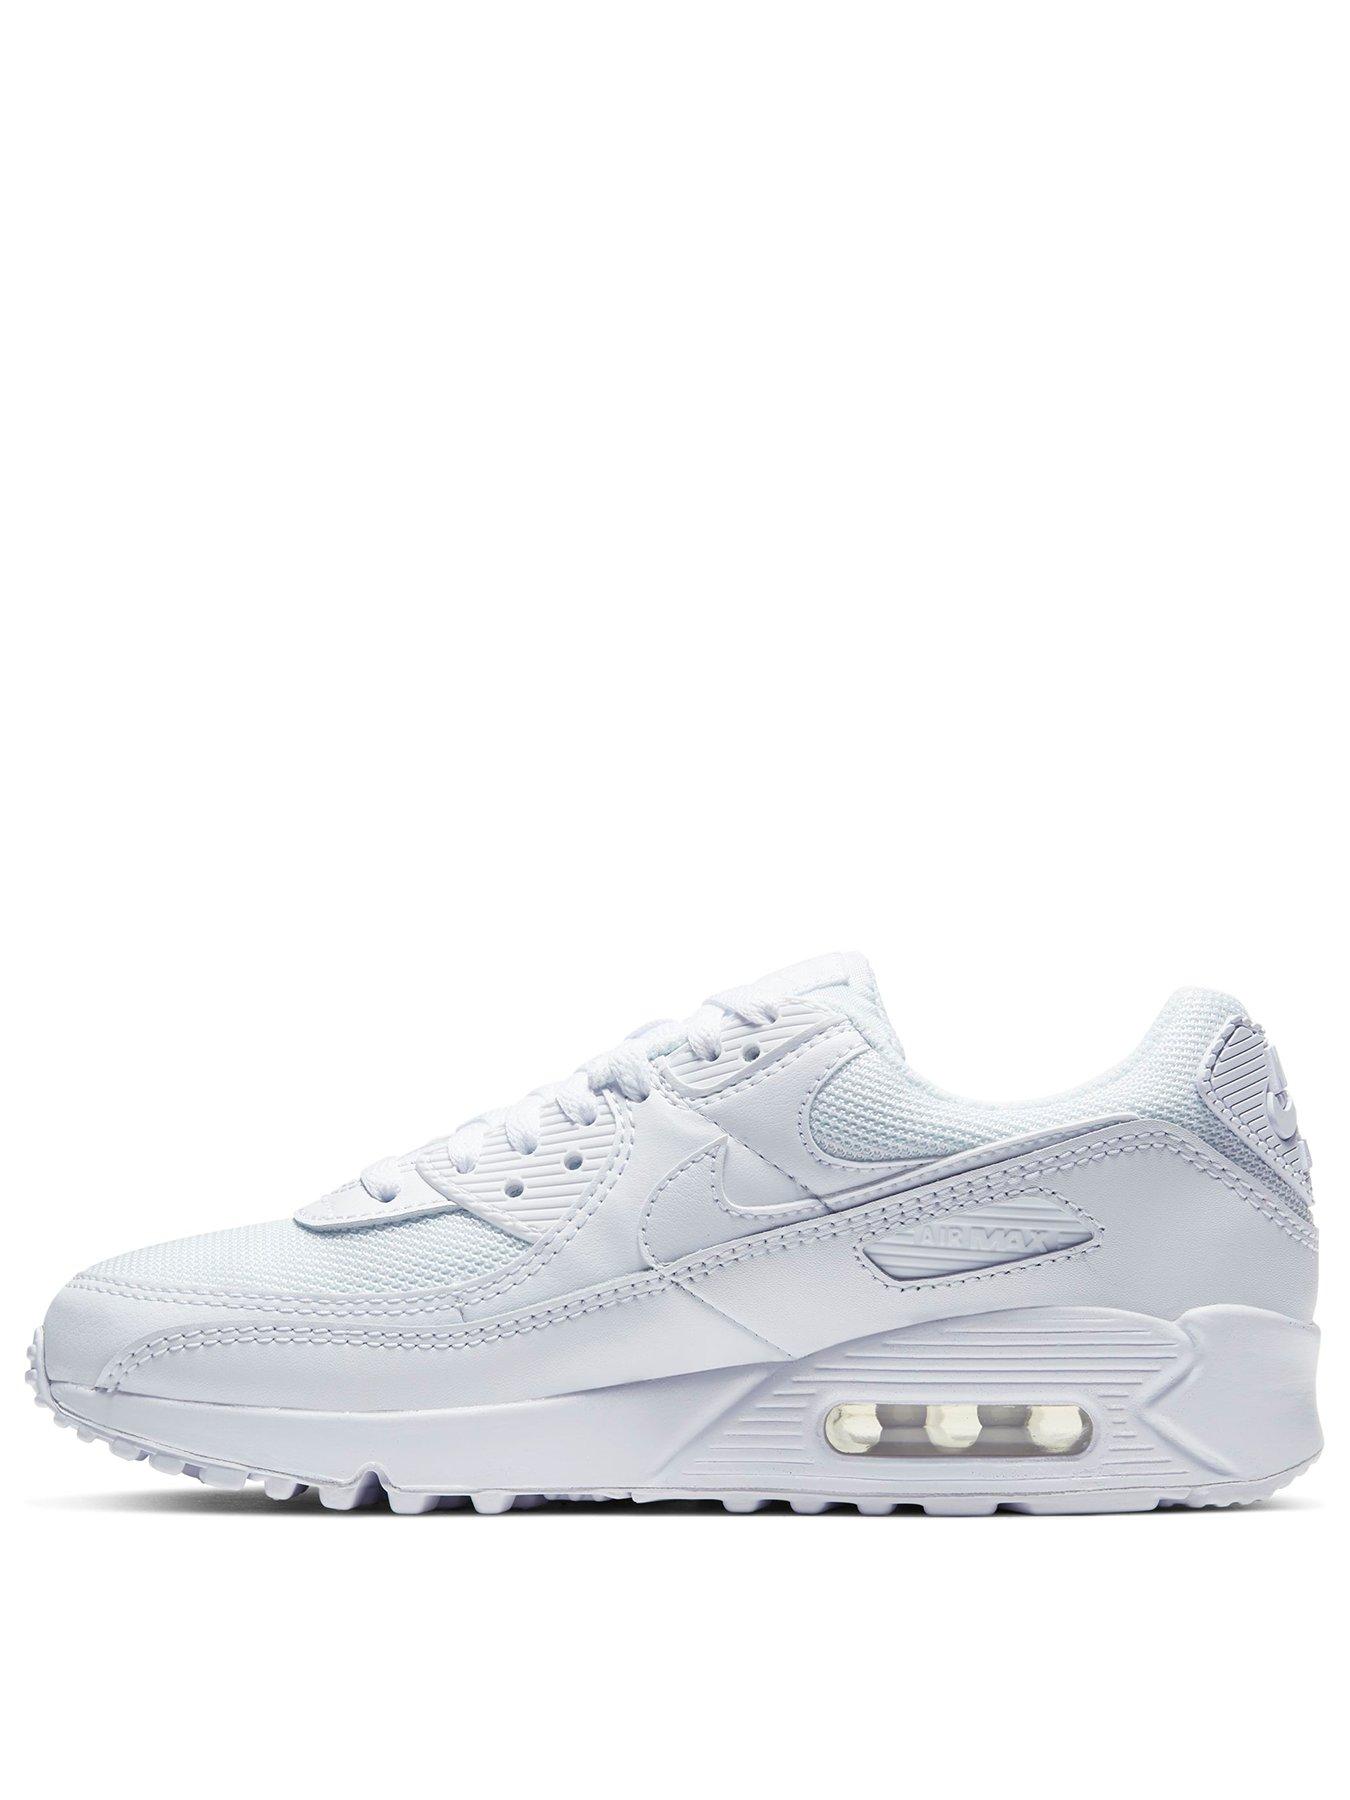 Nike Air Max 90 - White | littlewoods.com